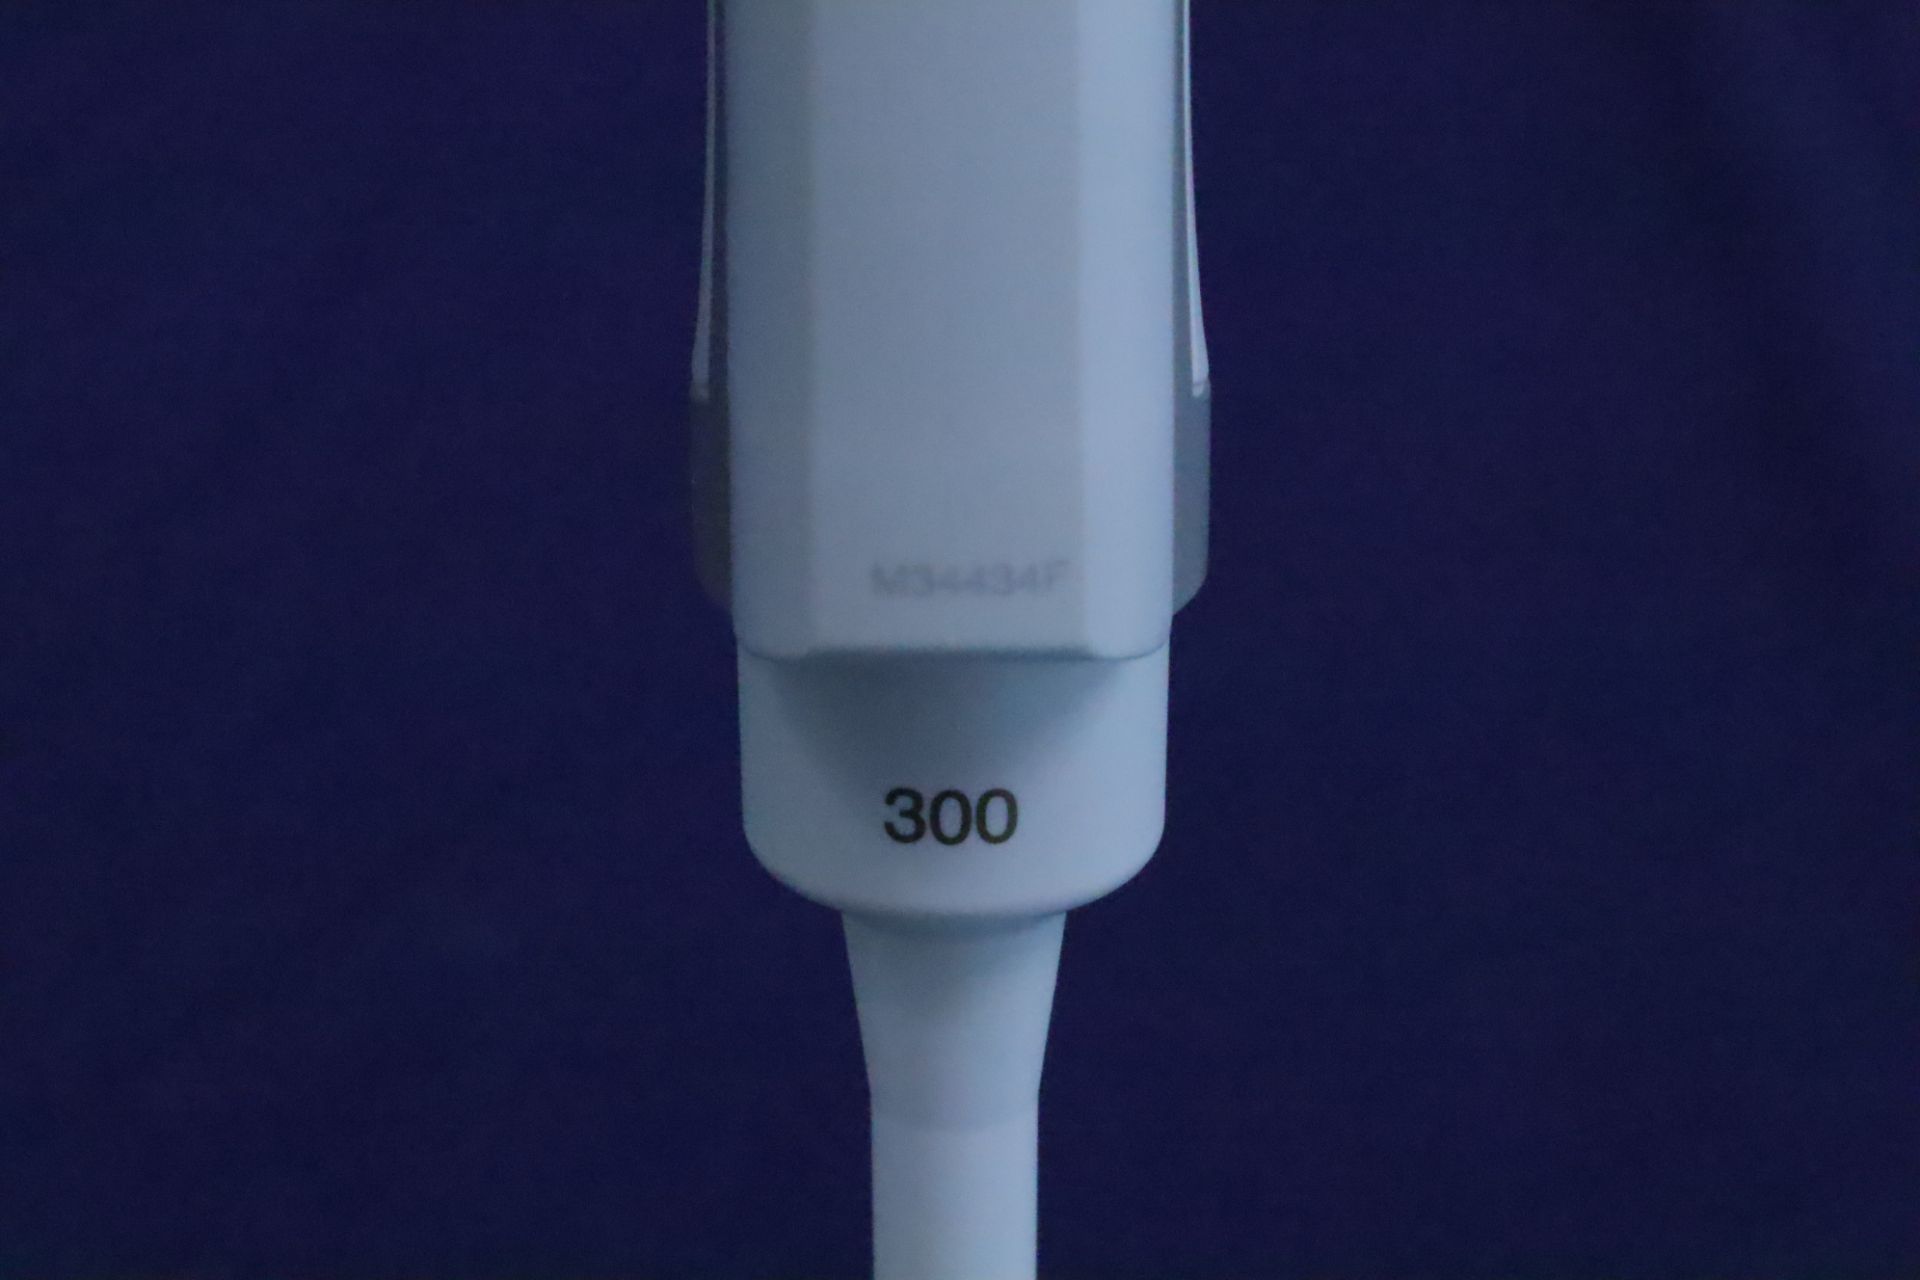 Eppendorf Research Plus Adjustable Volume Pipette 30-300 uL - Image 4 of 4